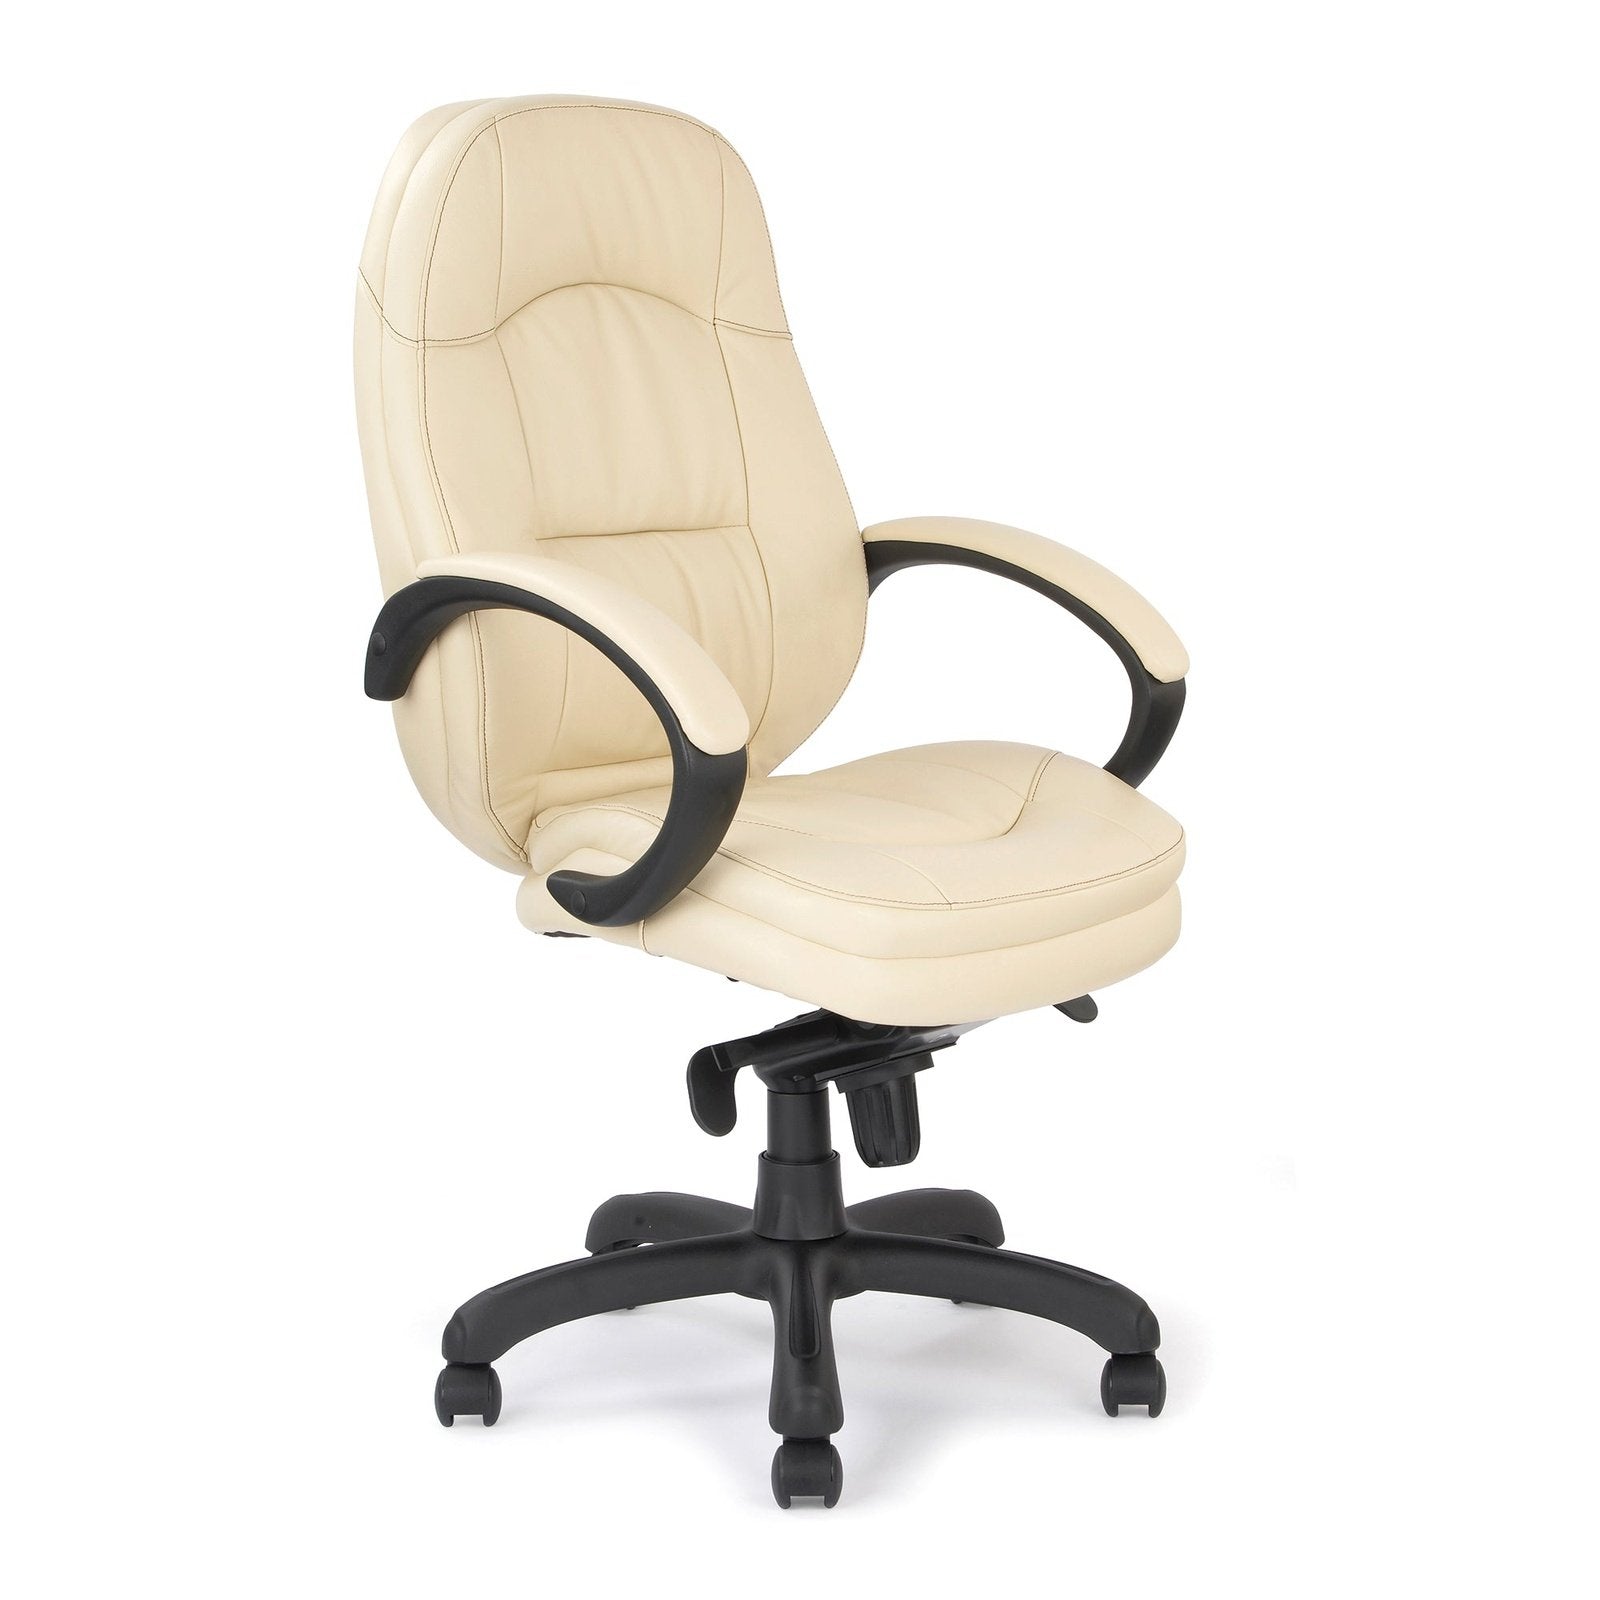 Luxurious Leather Faced Executive Armchair with Padded, Upholstered Armpads and Pronounced Lumbar Support - Office Products Online